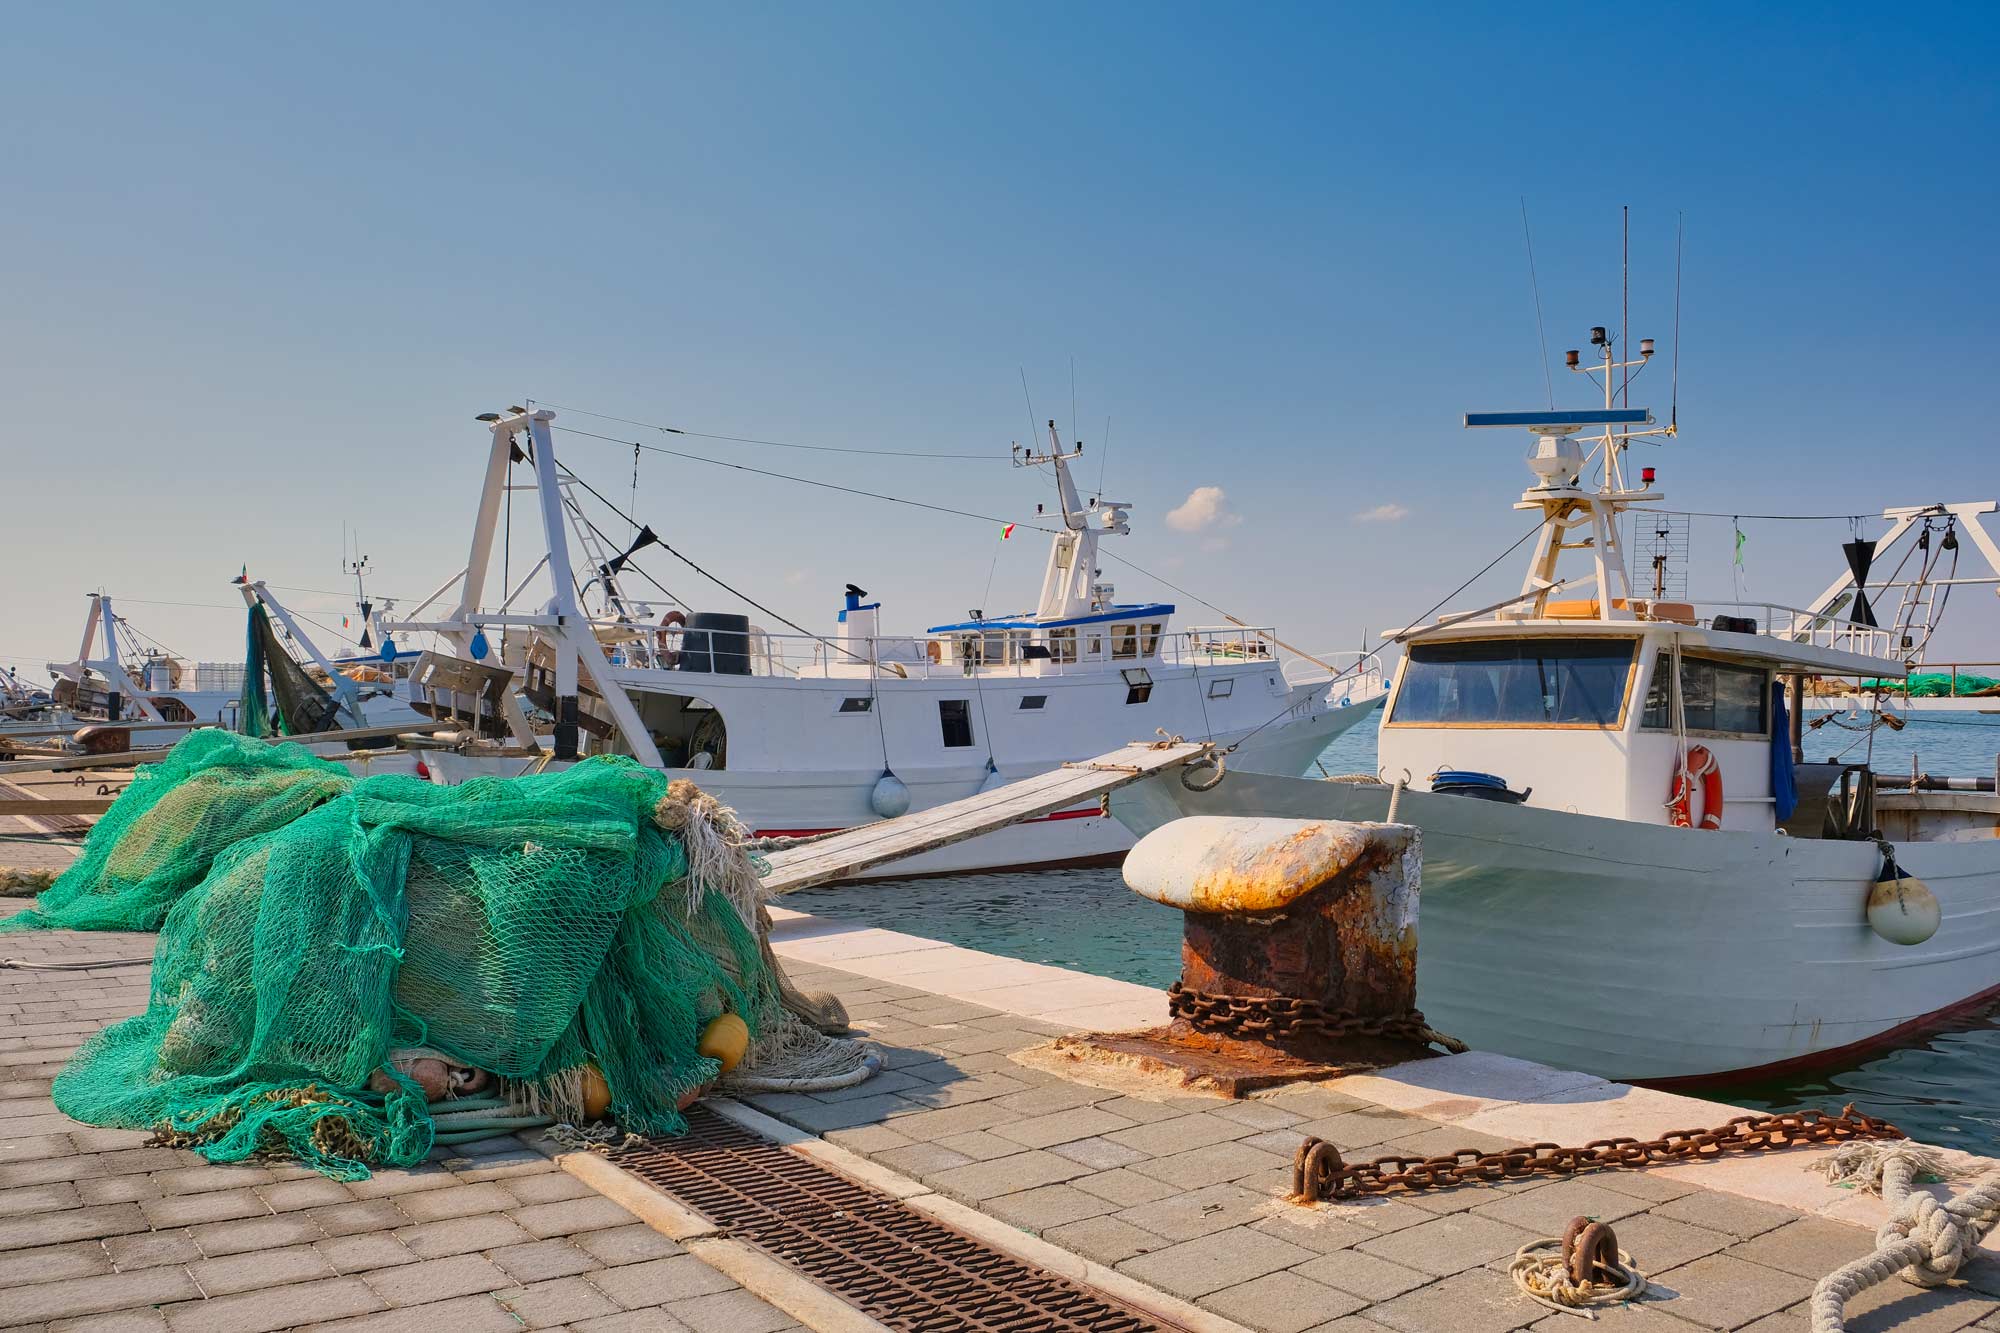 The Guardian: ‘Phenomenal loophole’ in quotas could lead to massive overfishing